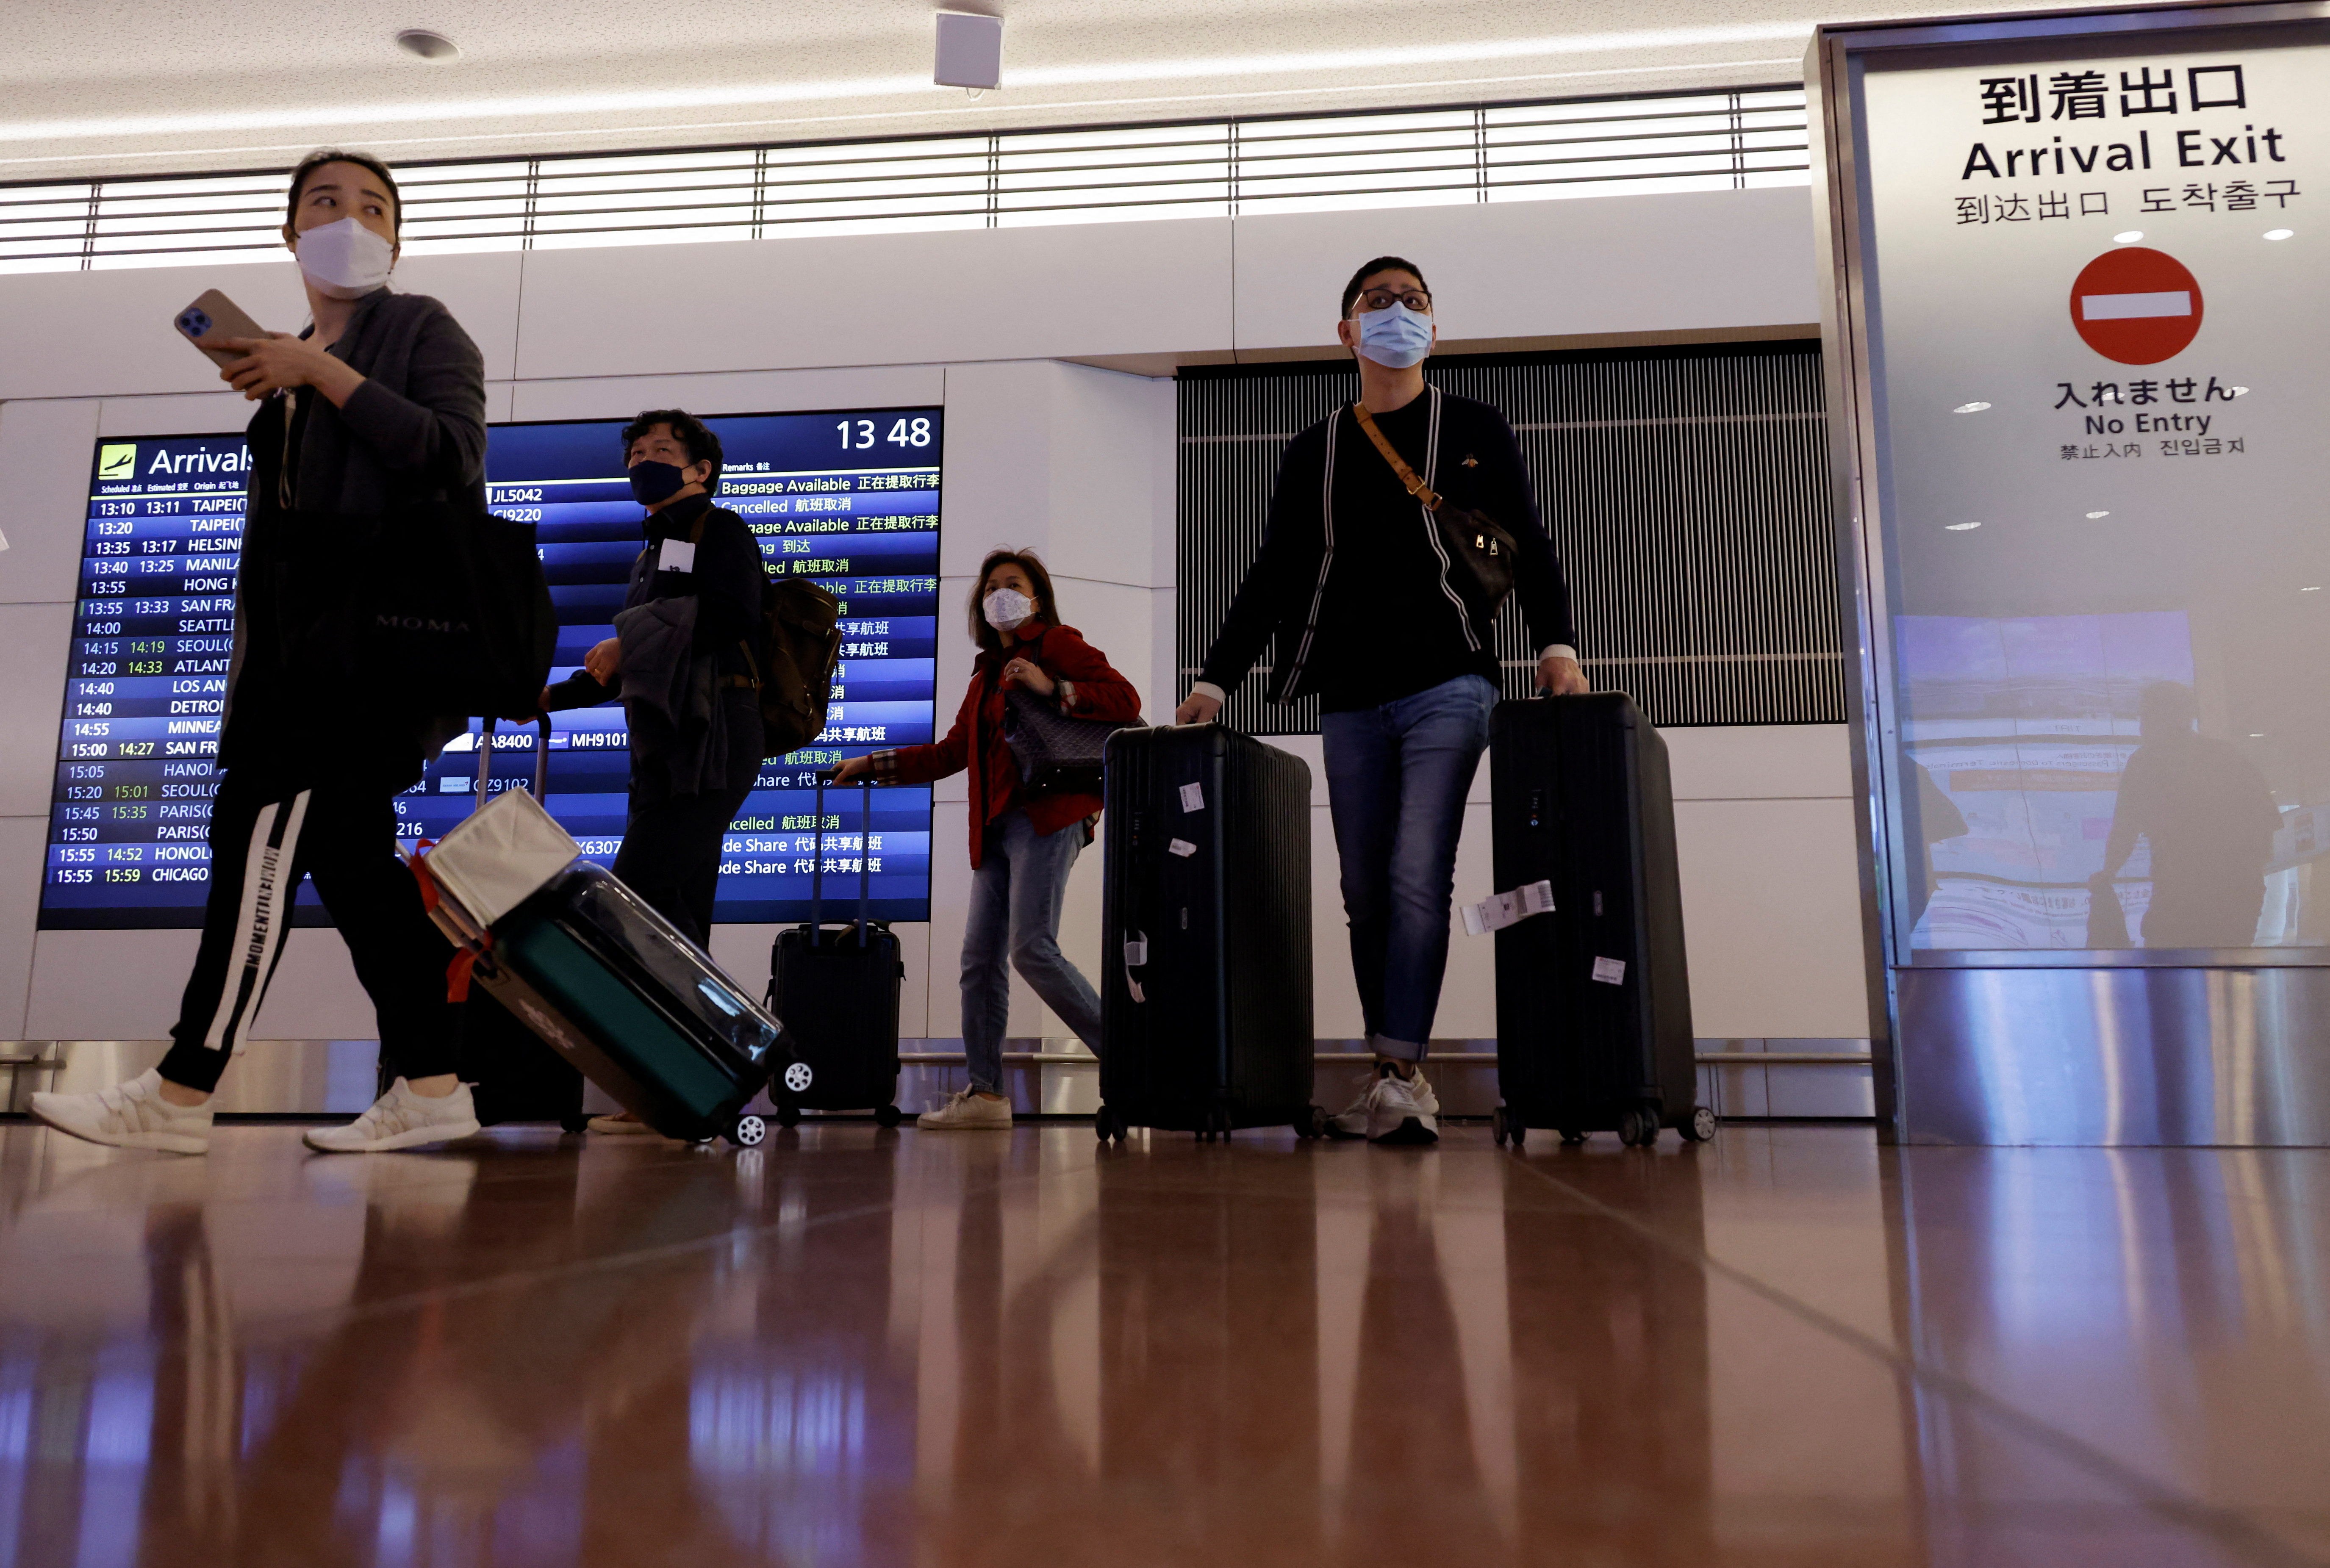 Japan announced that it will require a negative COVID-19 test result from December 31 upon arrival of travelers from mainland China (Reuters/Issei Kato)